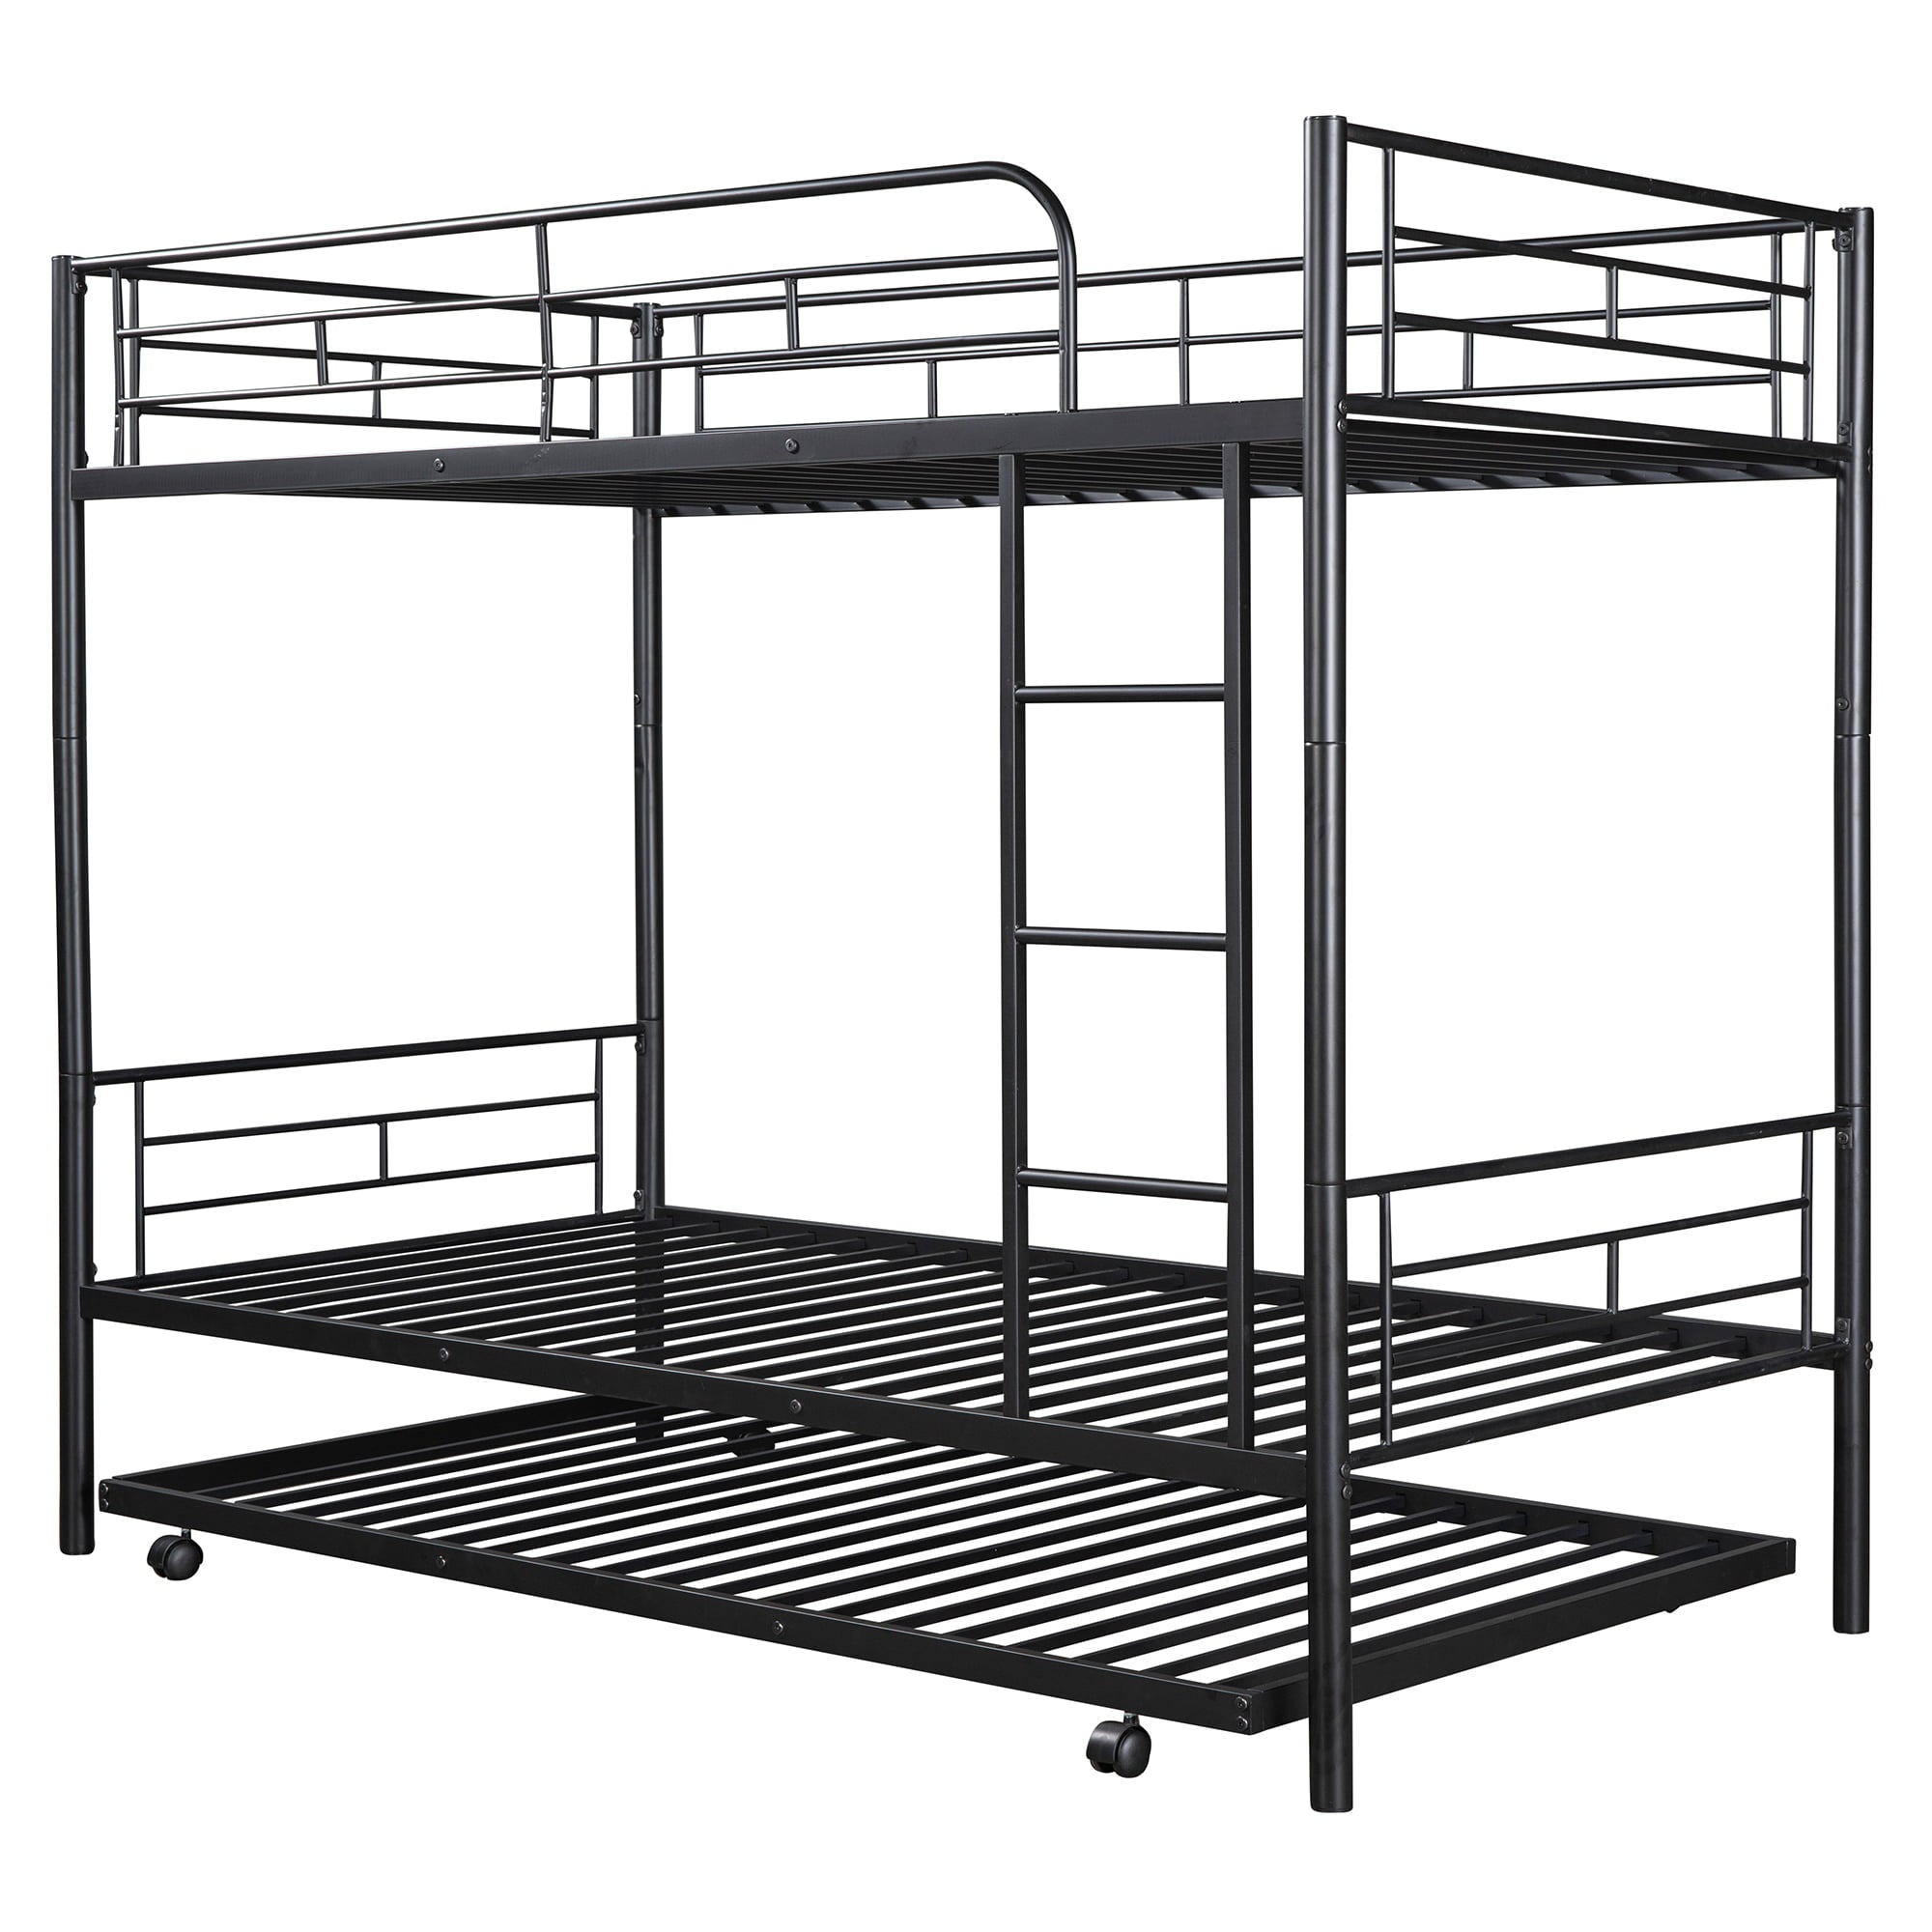 uhomepro Metal Twin Over Twin Bunk Beds with Trundle Bed, Twin Bunk Beds for Kids Adults Teens, Bunk Bed Can Be Divided Into 2 Twin Beds with Trundle, 2 Ladders, No Box Spring Need, Black